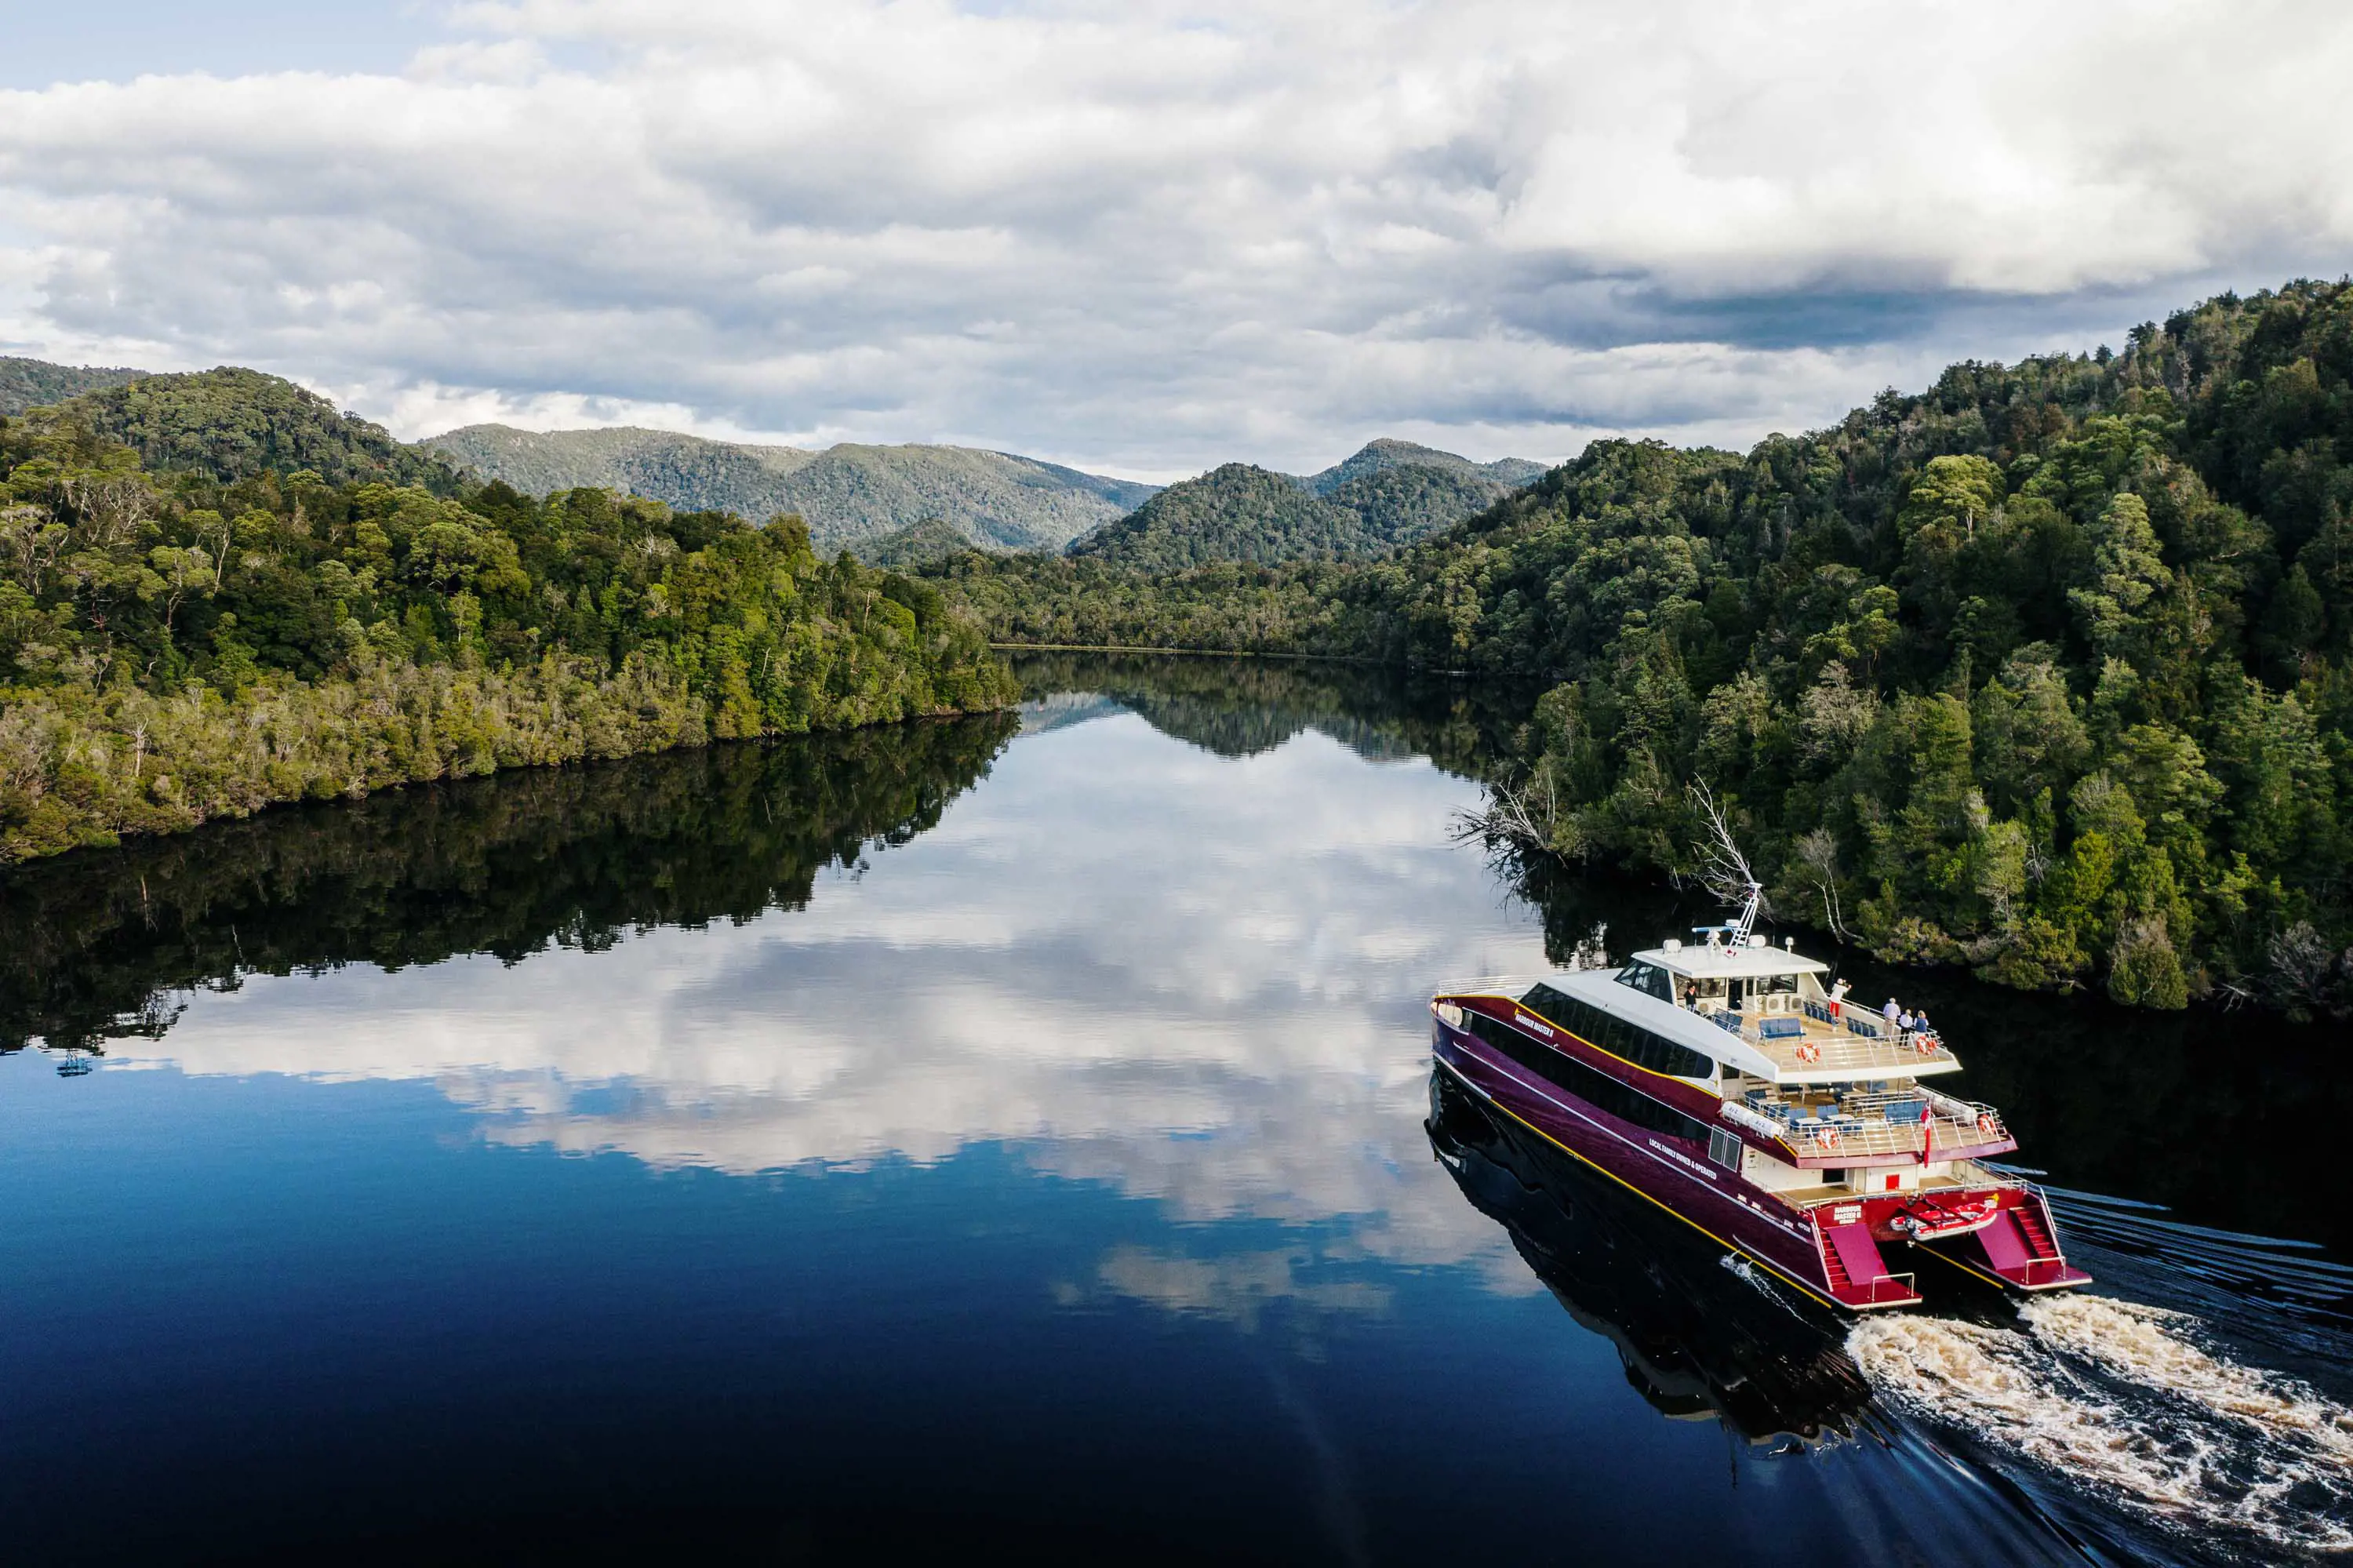 A large catamaran cruiser moves gently through glassy water up a river surrounded by dense forest.